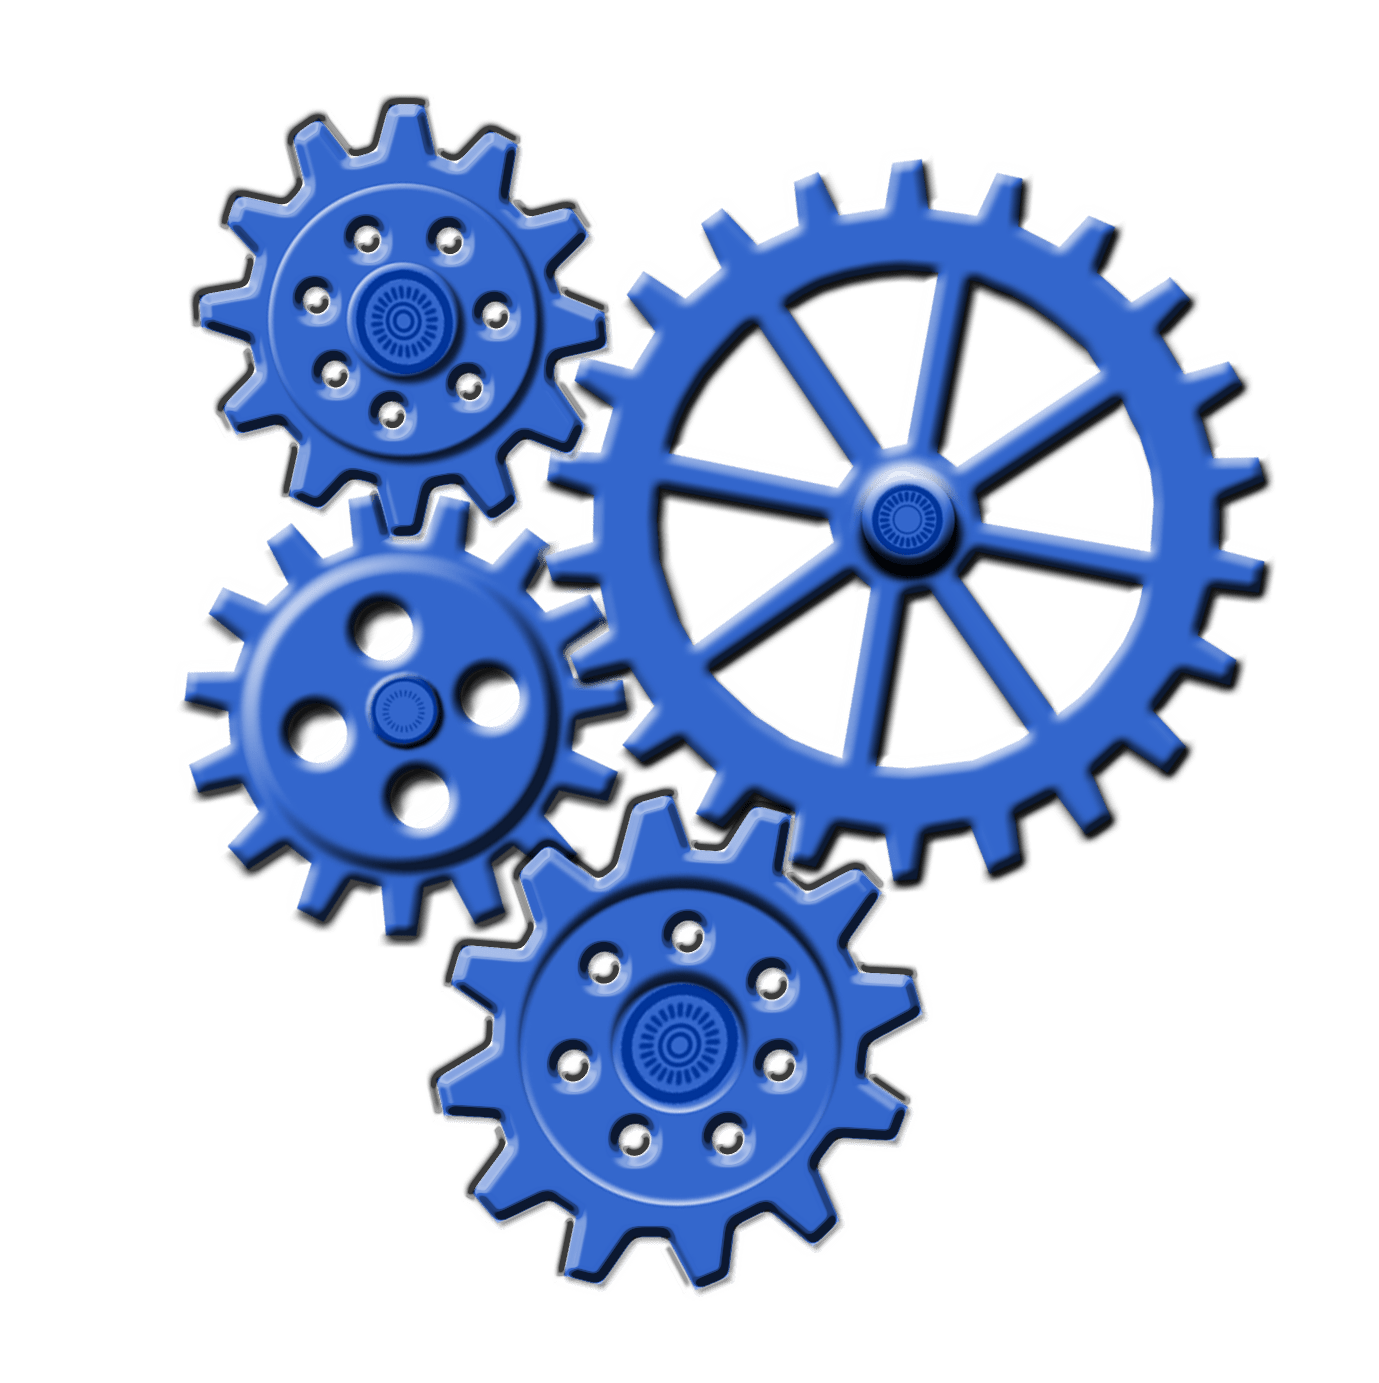 picture of gears